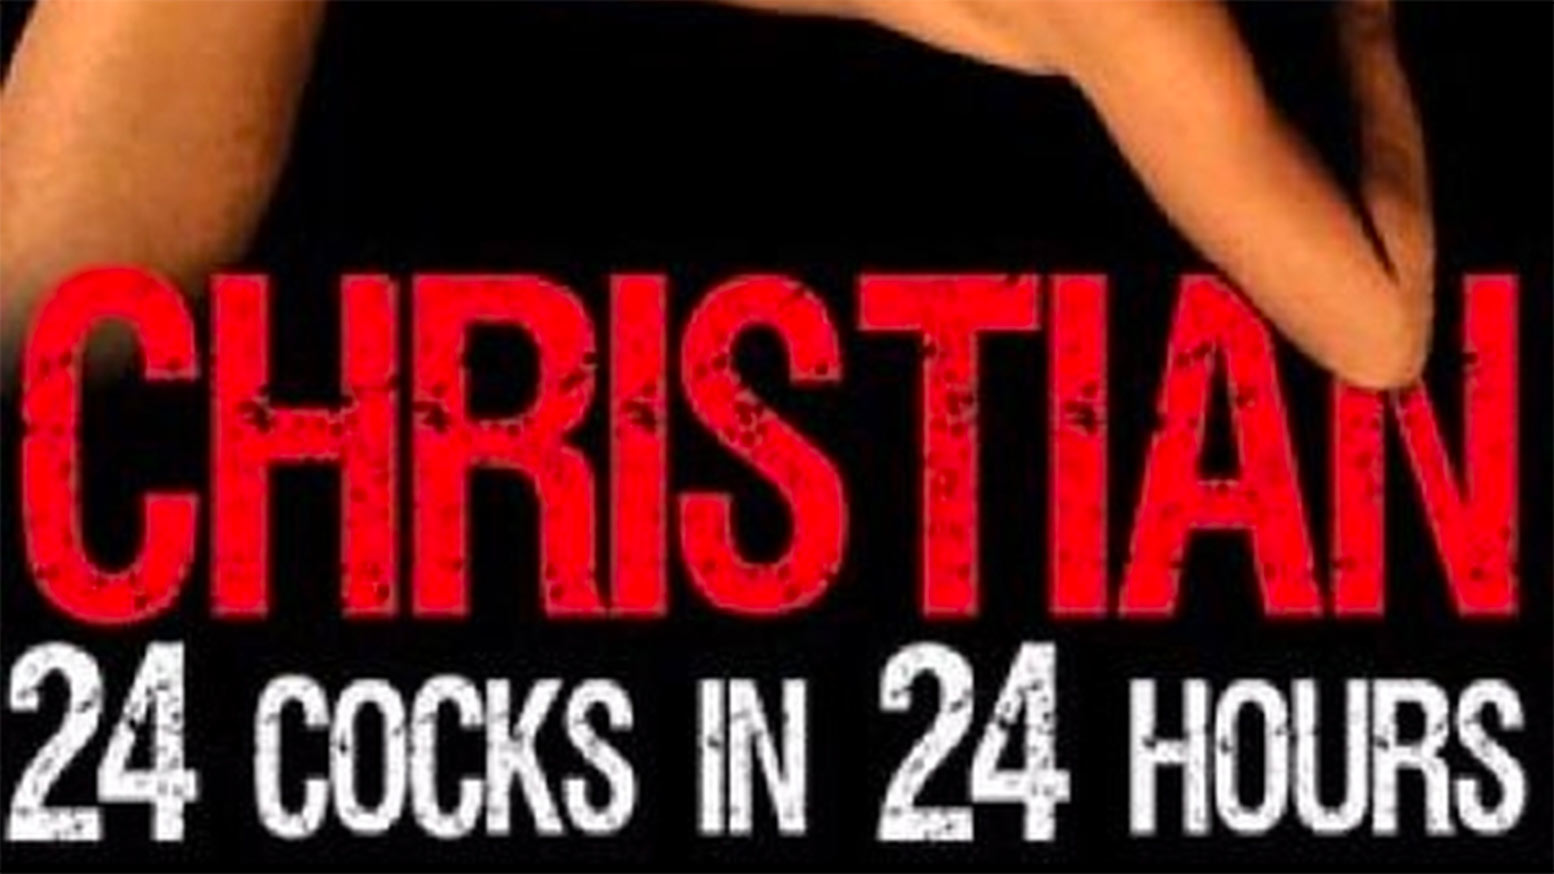 CHRISTIAN: 24 COCKS IN 24 HOURS, Trailer